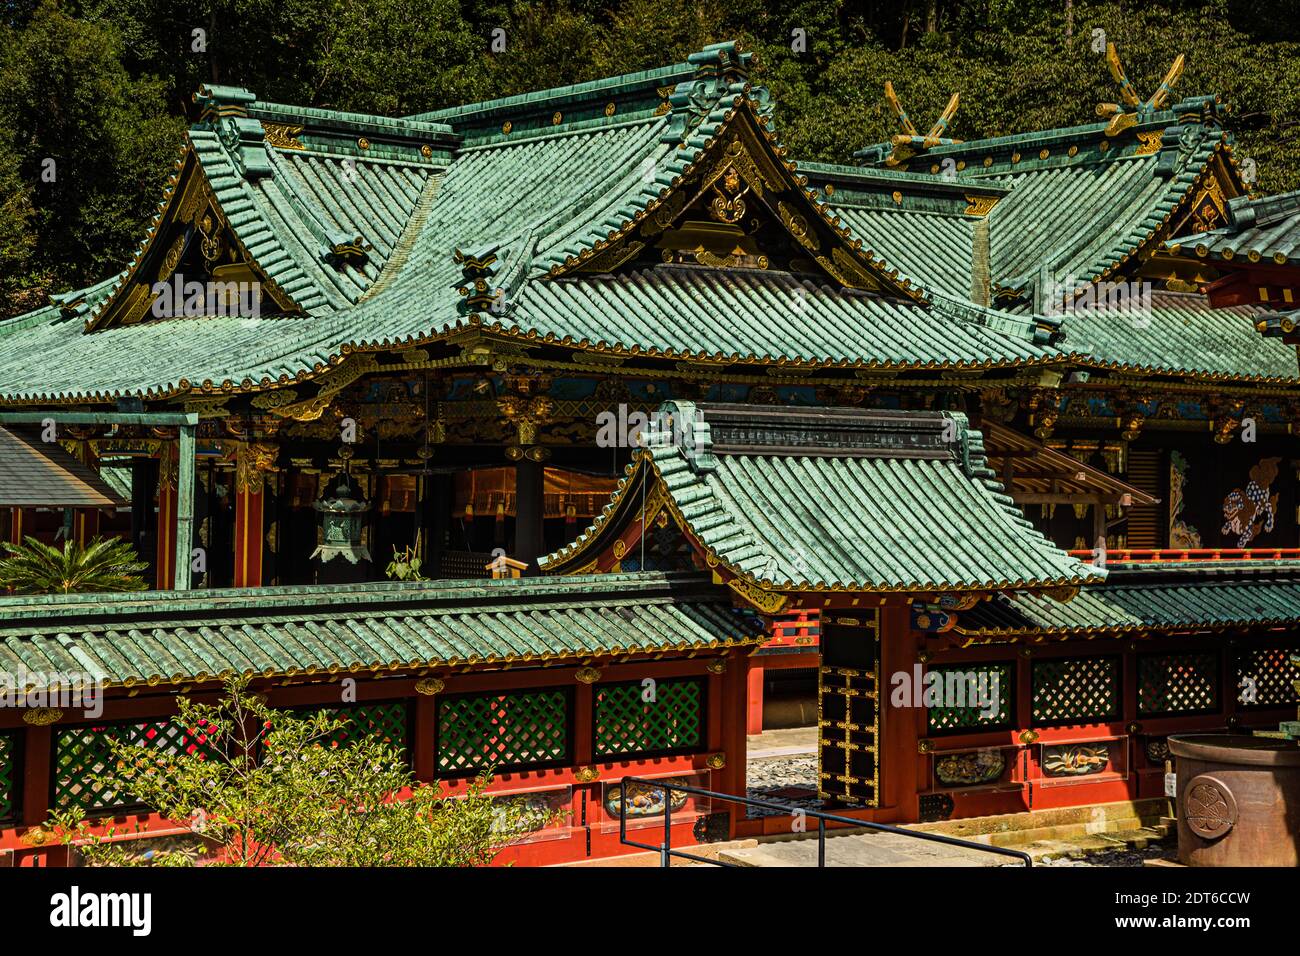 Kunozan Toshogu Shrine in Shizuoka, Japan. The fireproof metal roofs of the buildings are richly decorated Stock Photo